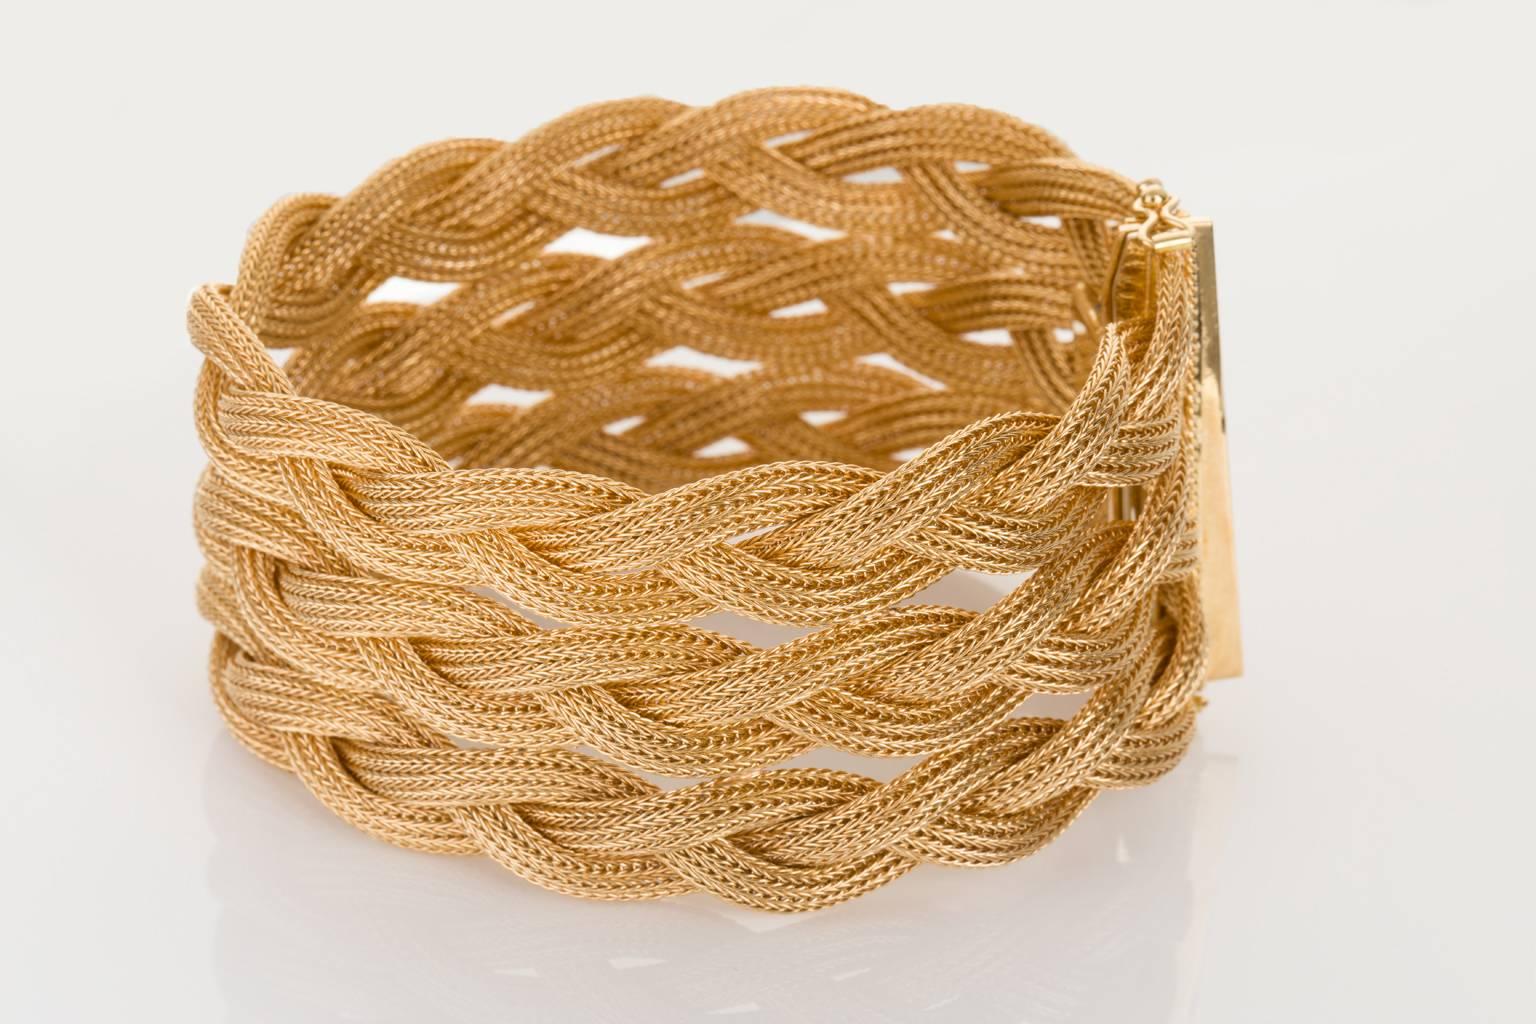 A wonderful creation and a wearable work of art sitting on your arm. An 18 karat yellow gold triple plaited woven flexible bracelet that feels so fabulous on the skin. The look and feel of this bracelet is eye-catching and unique and the detail in